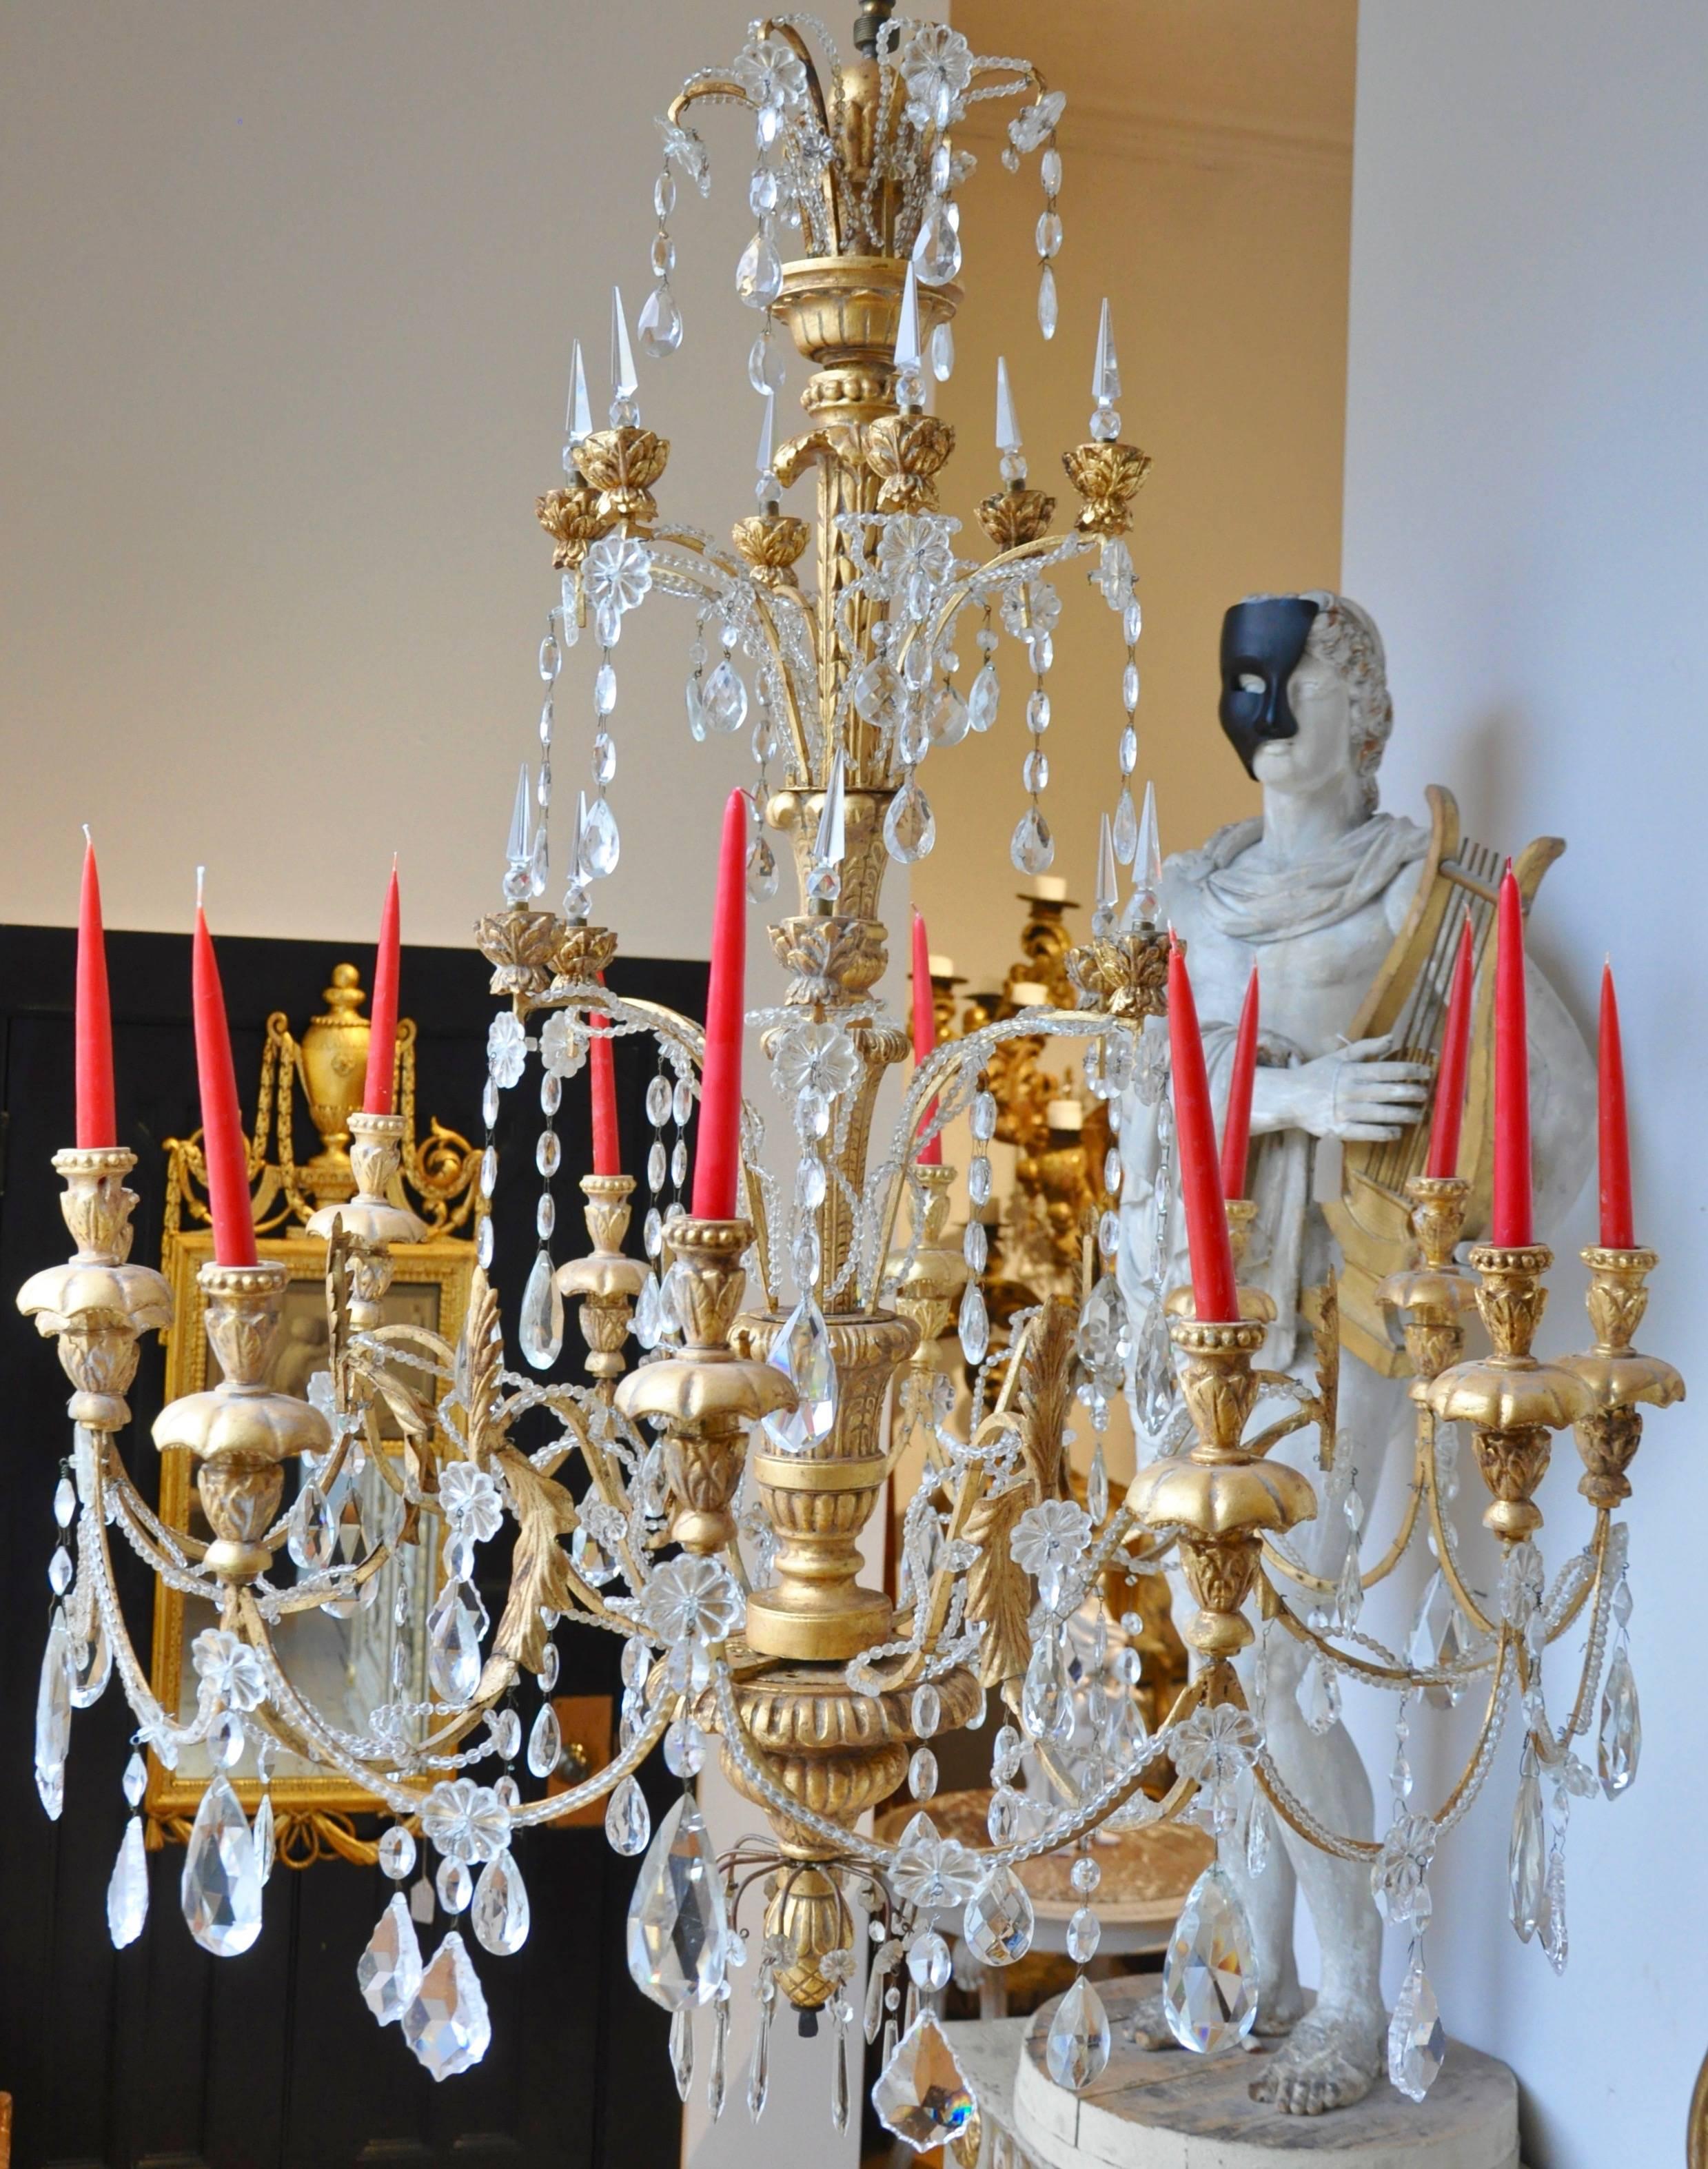 19th Century Italian Neoclassical Giltwood and Crystal Chandelier

Urn form body issuing 12 arms
original crystals
Neoclassical 
can be French wired at customer's request